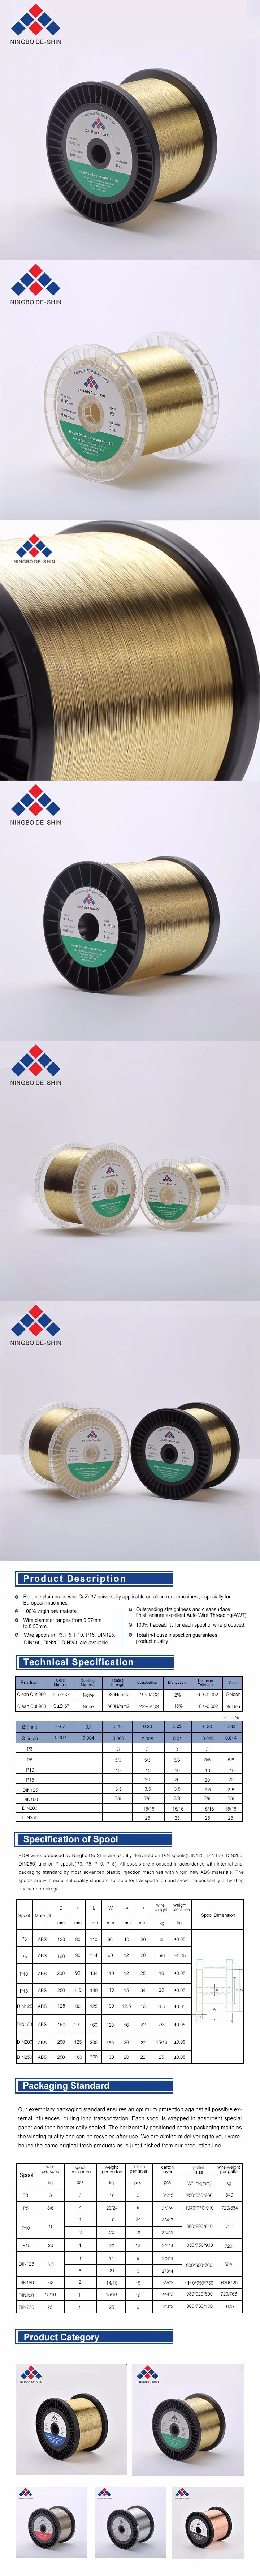 Top EDM Wire Manufacturer Brass Electrode Wire, Coated EDM Wire to Replace Bedra, Oki, Hitachi Wire